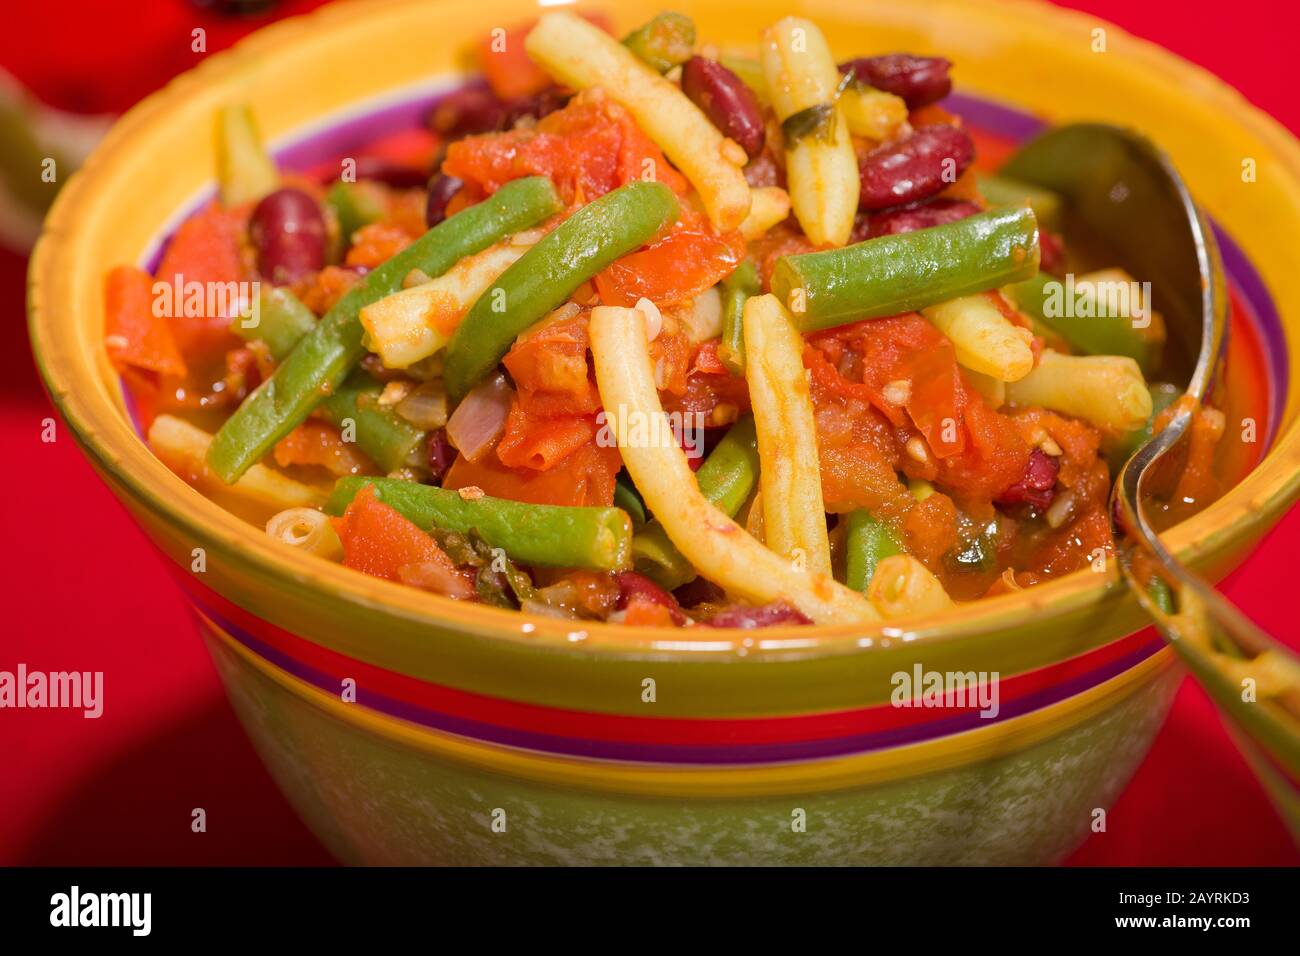 Herbed three-bean dish with tomatoes in a bowl, containing green beans, yellow wax beans and kidney beans Stock Photo